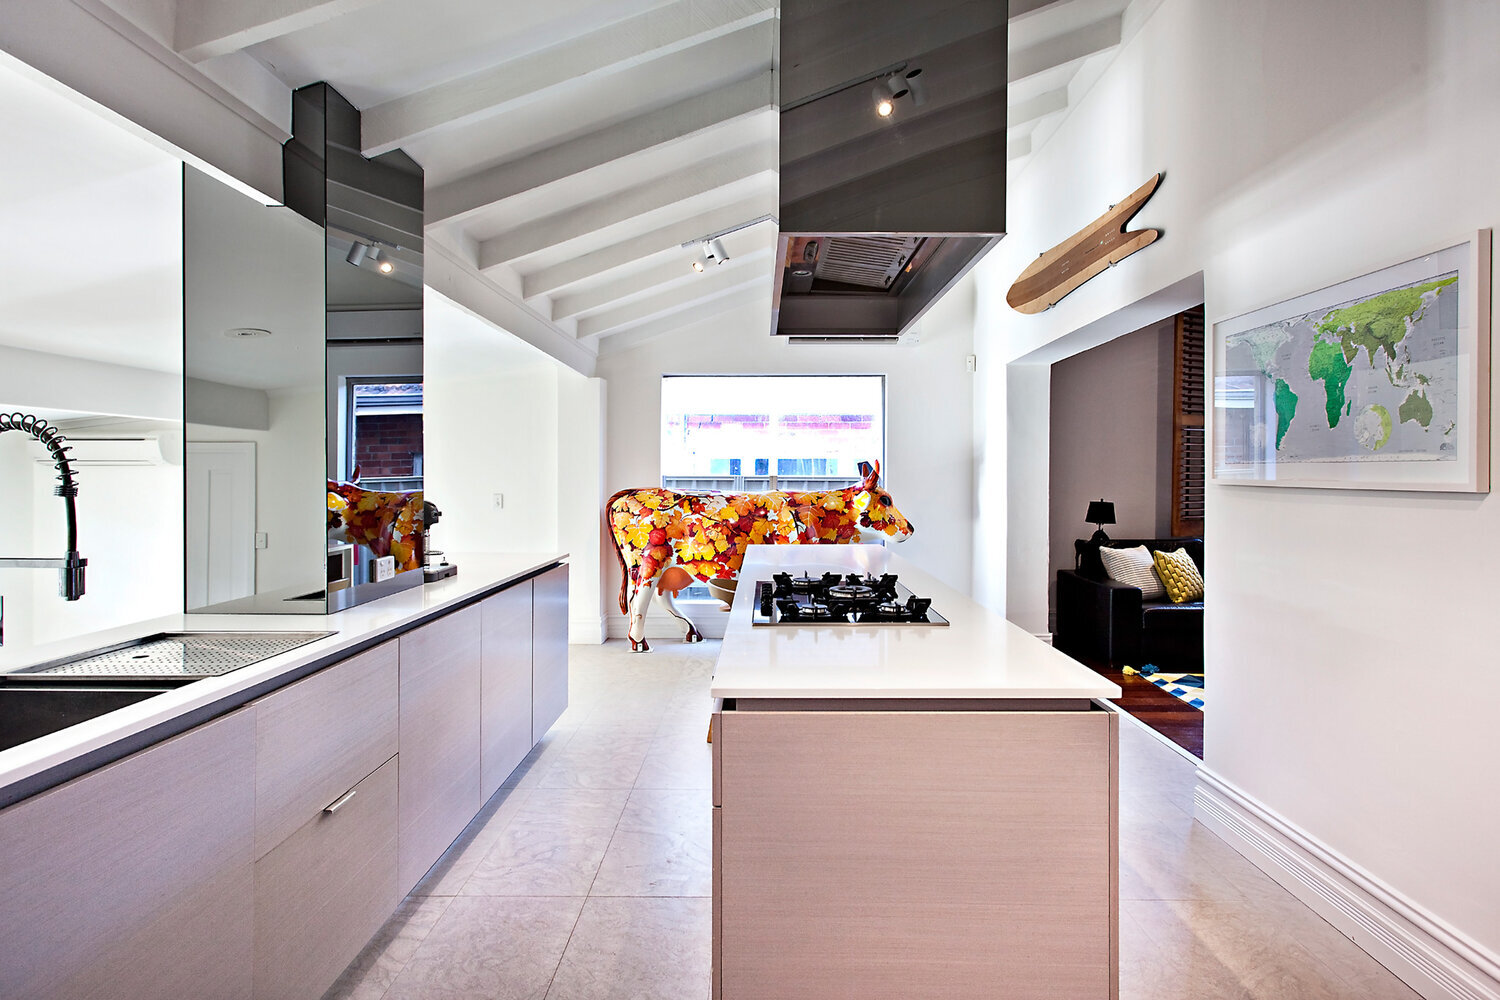 Adyn Kelly kitchen design and interior architecture Perth Spreading Roomers.jpg